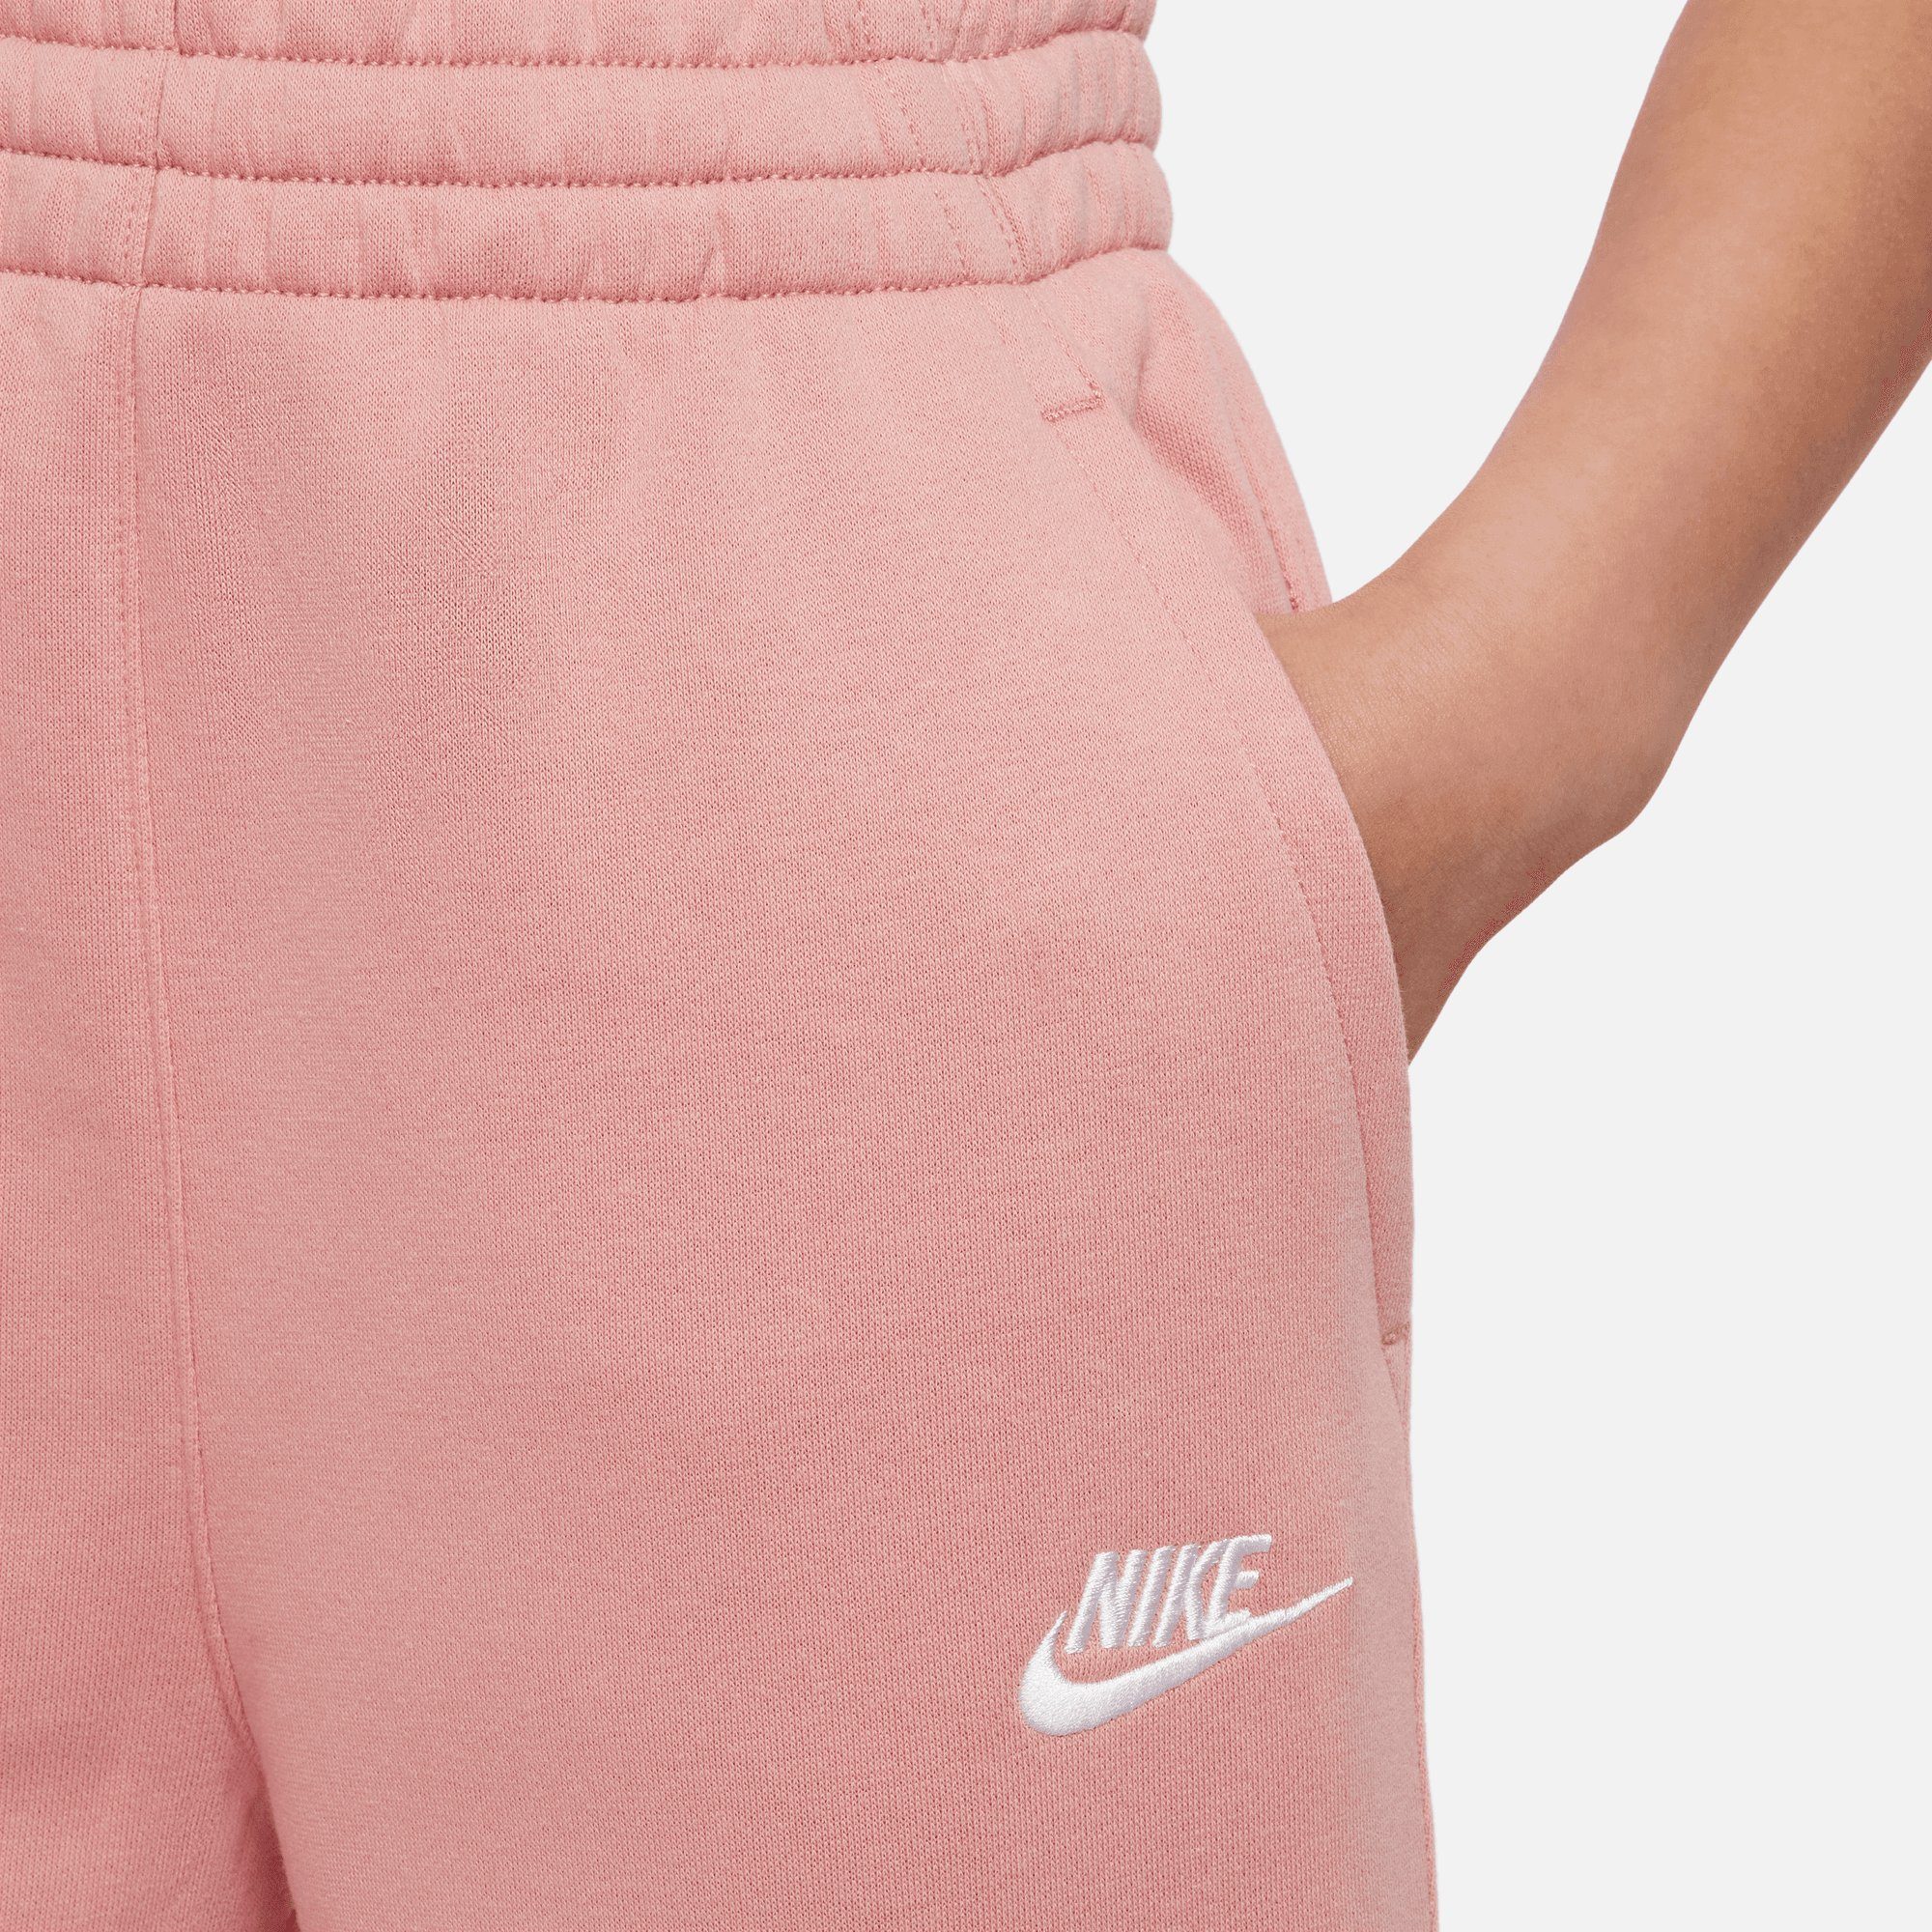 KIDS' PANTS STARDUST/WHITE Sportswear FLEECE Nike RED (GIRLS) CLUB STARDUST/RED BIG FITTED HIGH-WAISTED Jogginghose